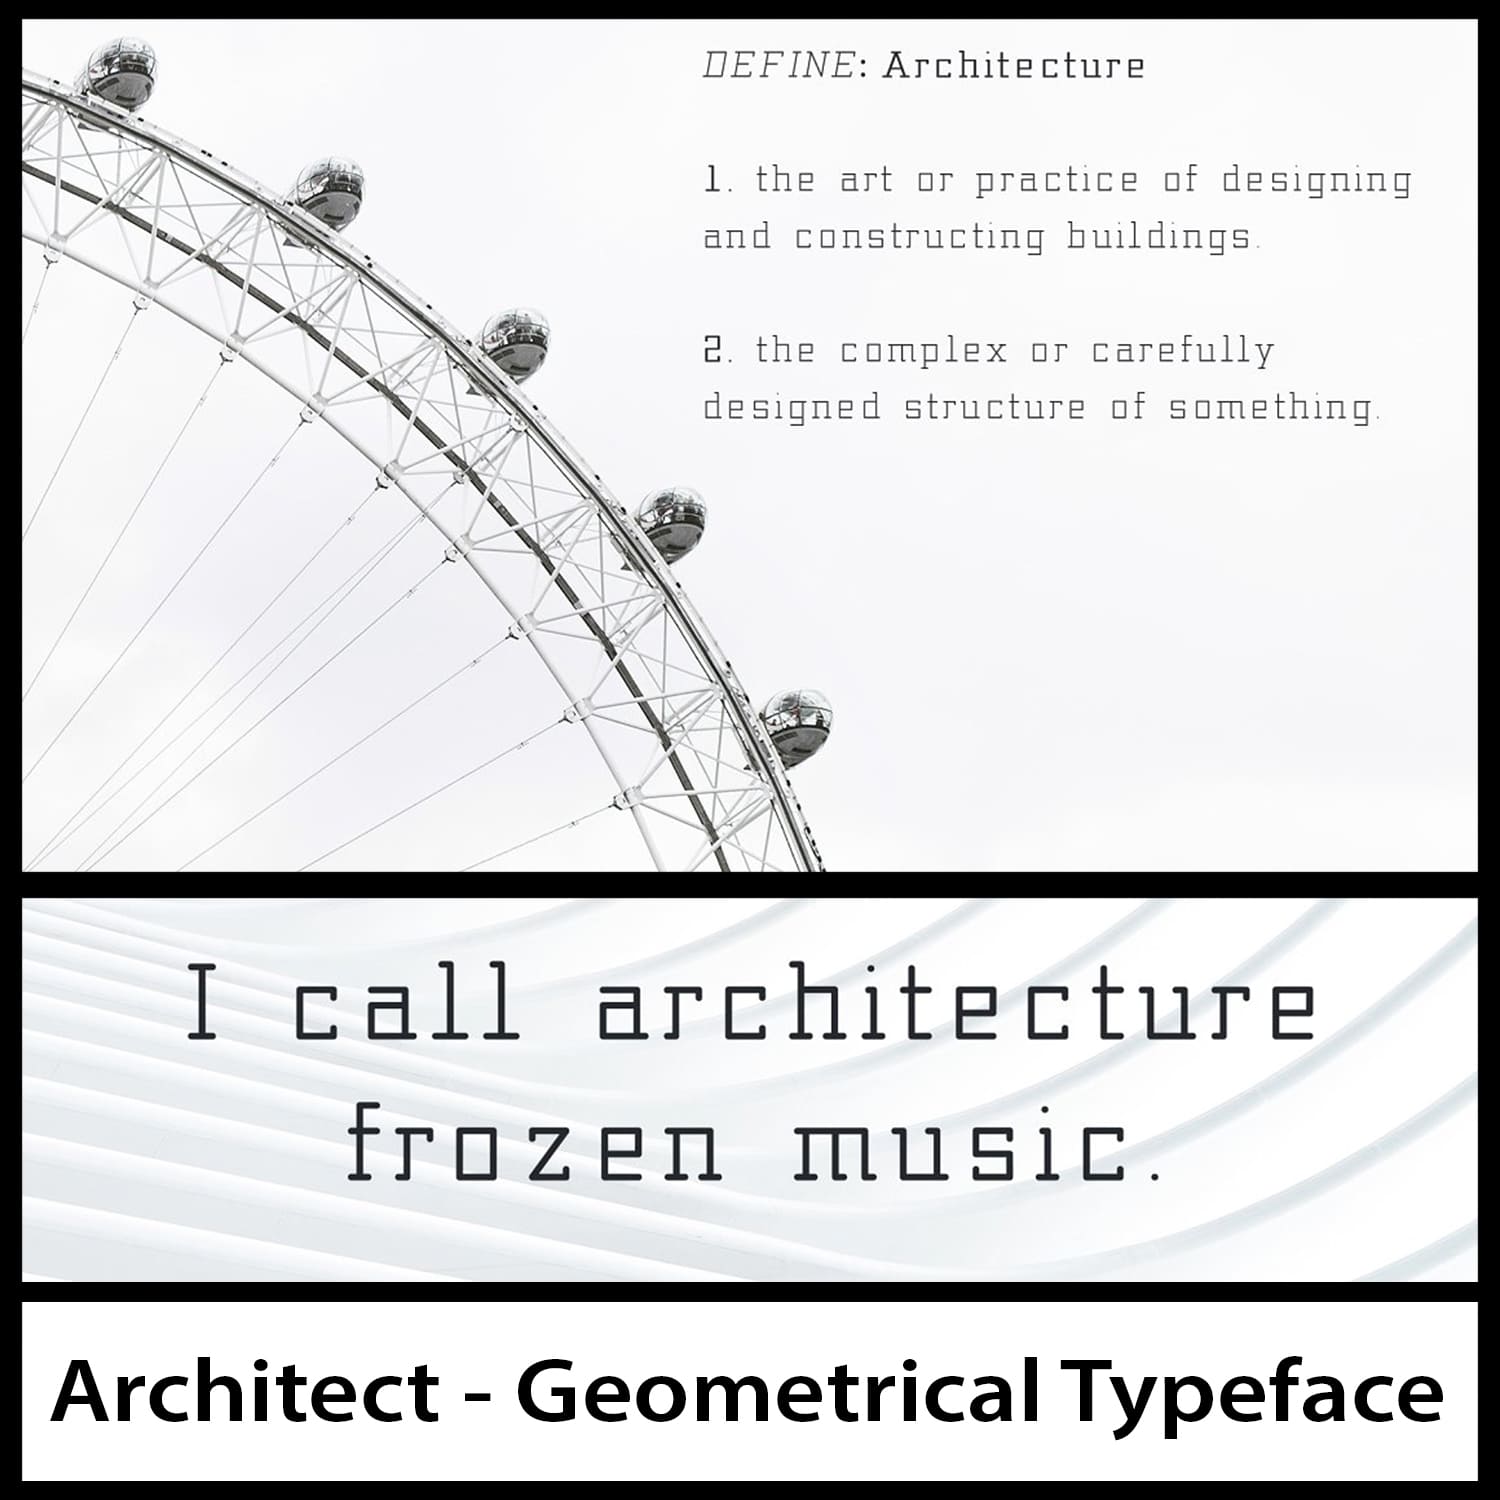 Architect - Geometrical Typeface main cover.